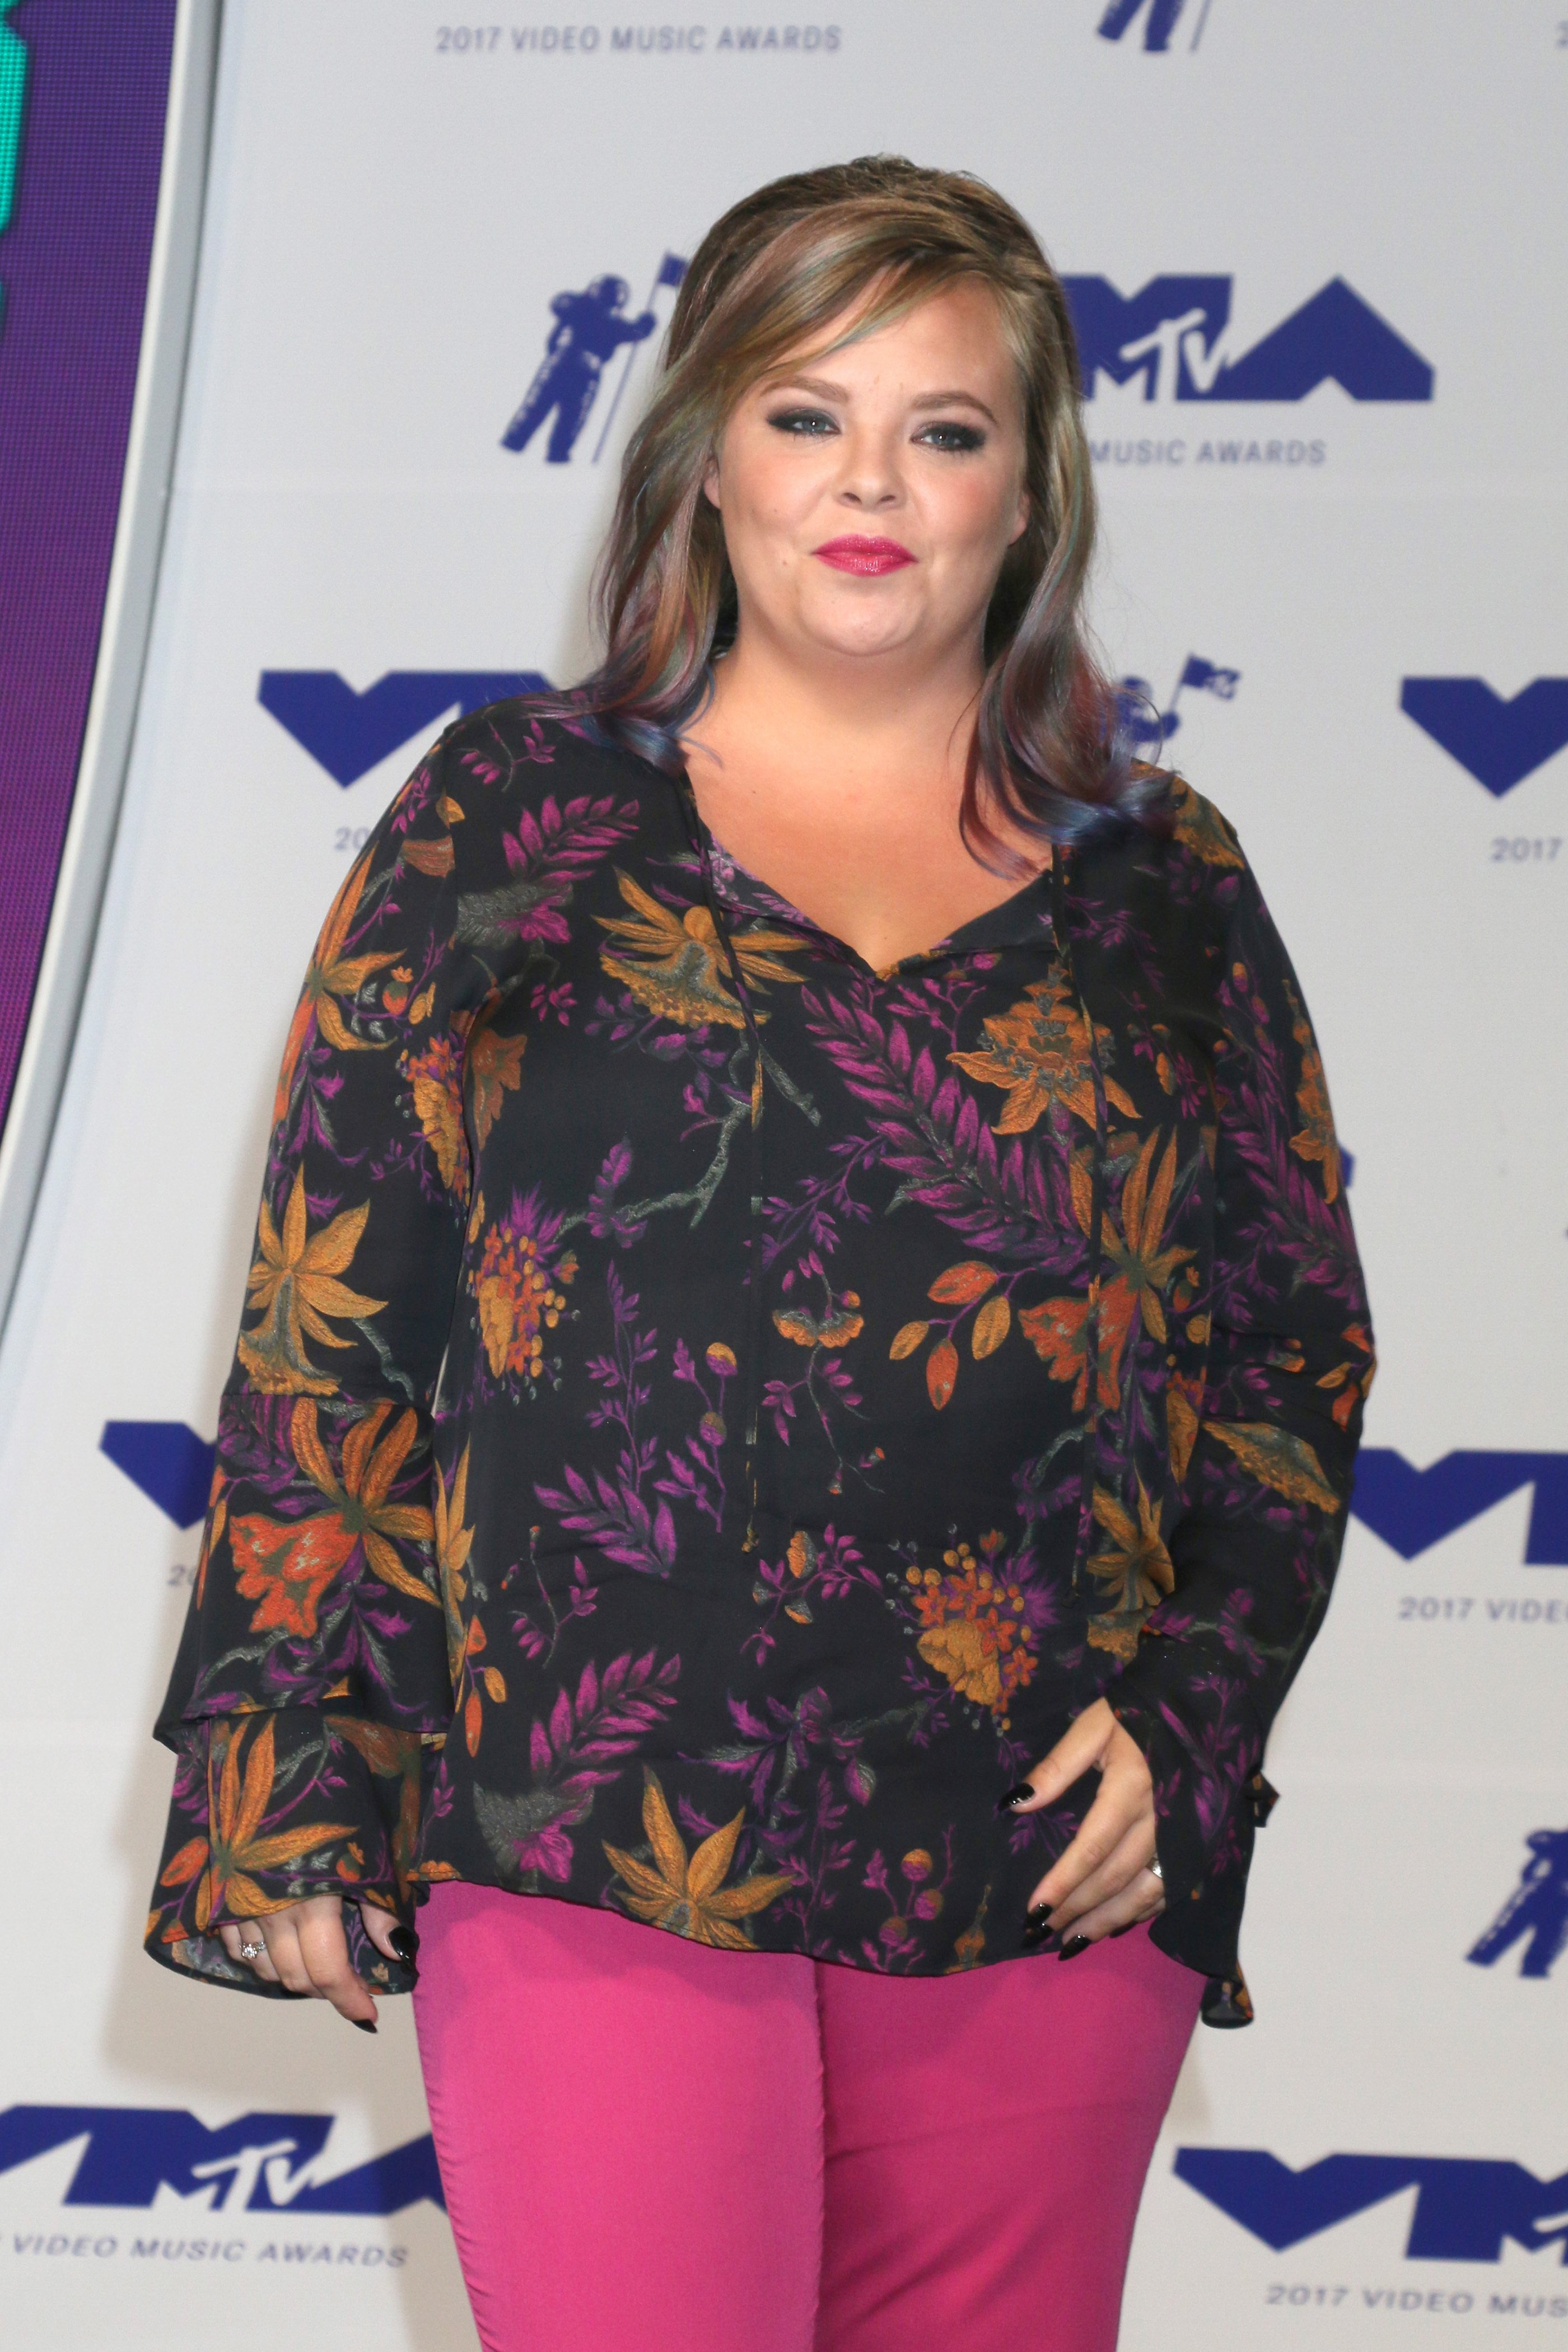 Catelynn Lowell at the MTV Video Music Awards 2017 at The Forum on August 27, 2017 in Inglewood, California | Photo: Shutterstock